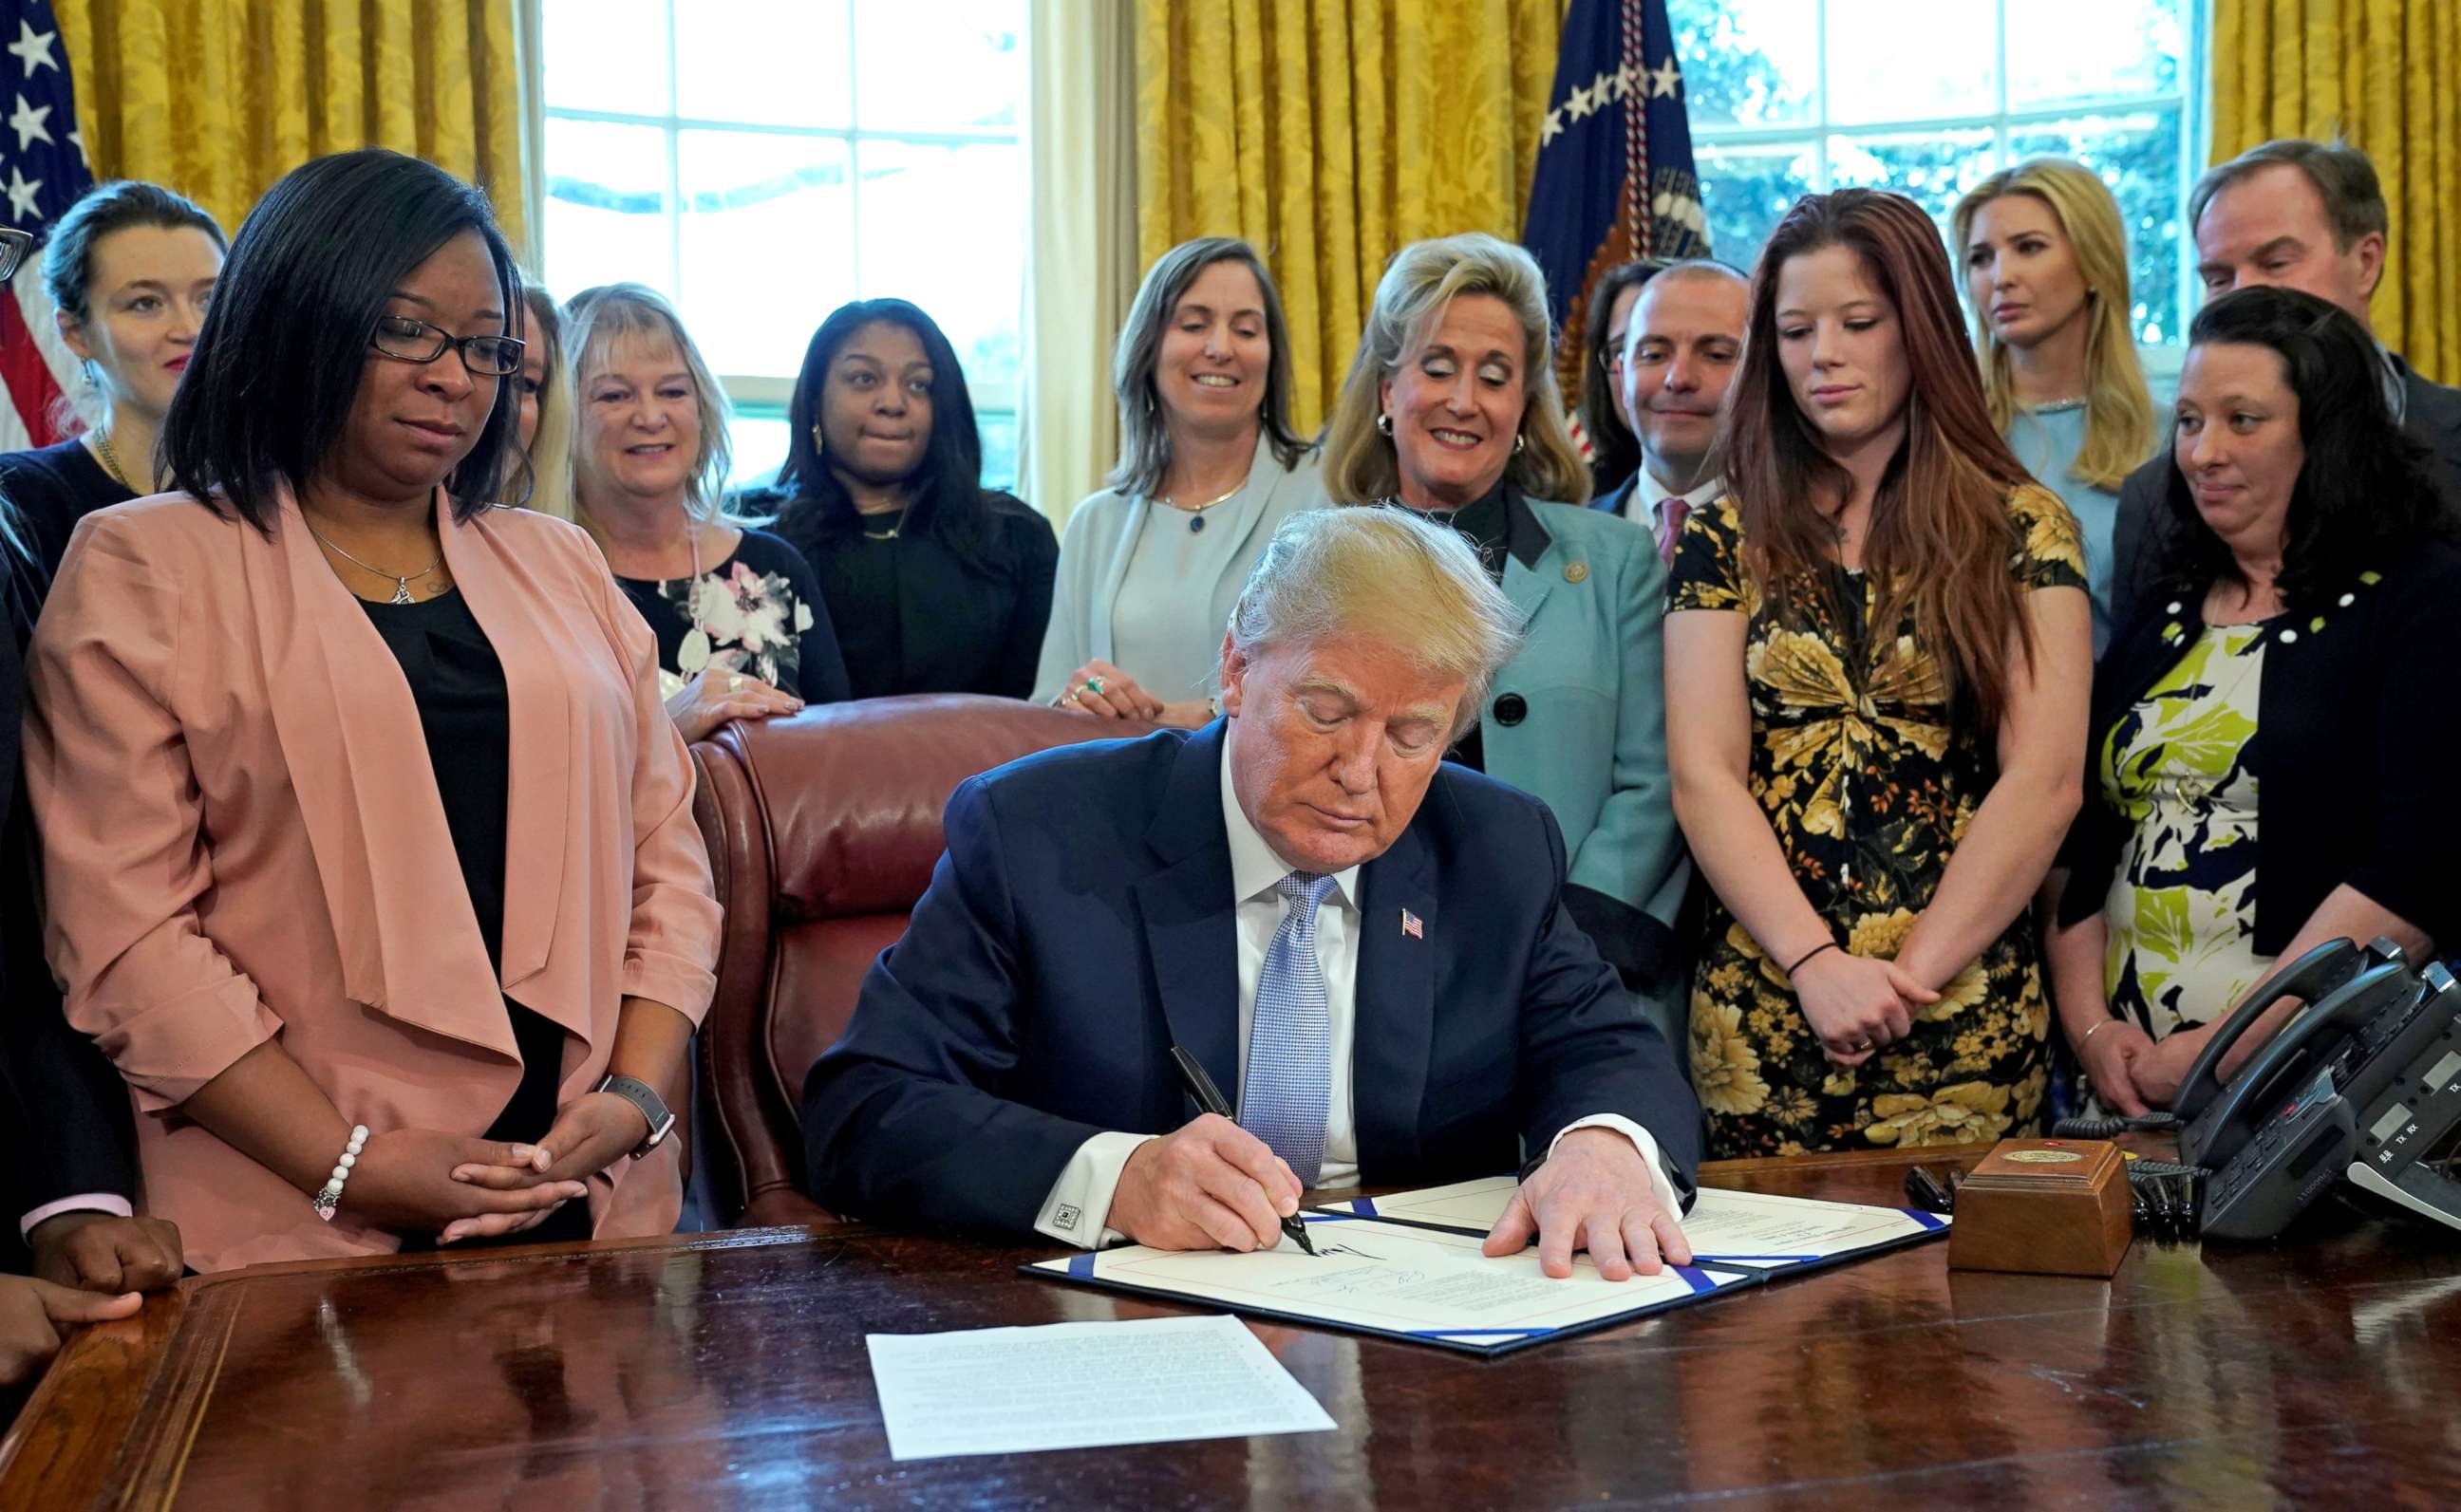 PHOTO: President Donald Trump signs H.R. 1865 "The Allow States and Victims To Fight Online Sex Trafficking Act" at the White House in Washington, April 11, 2018.